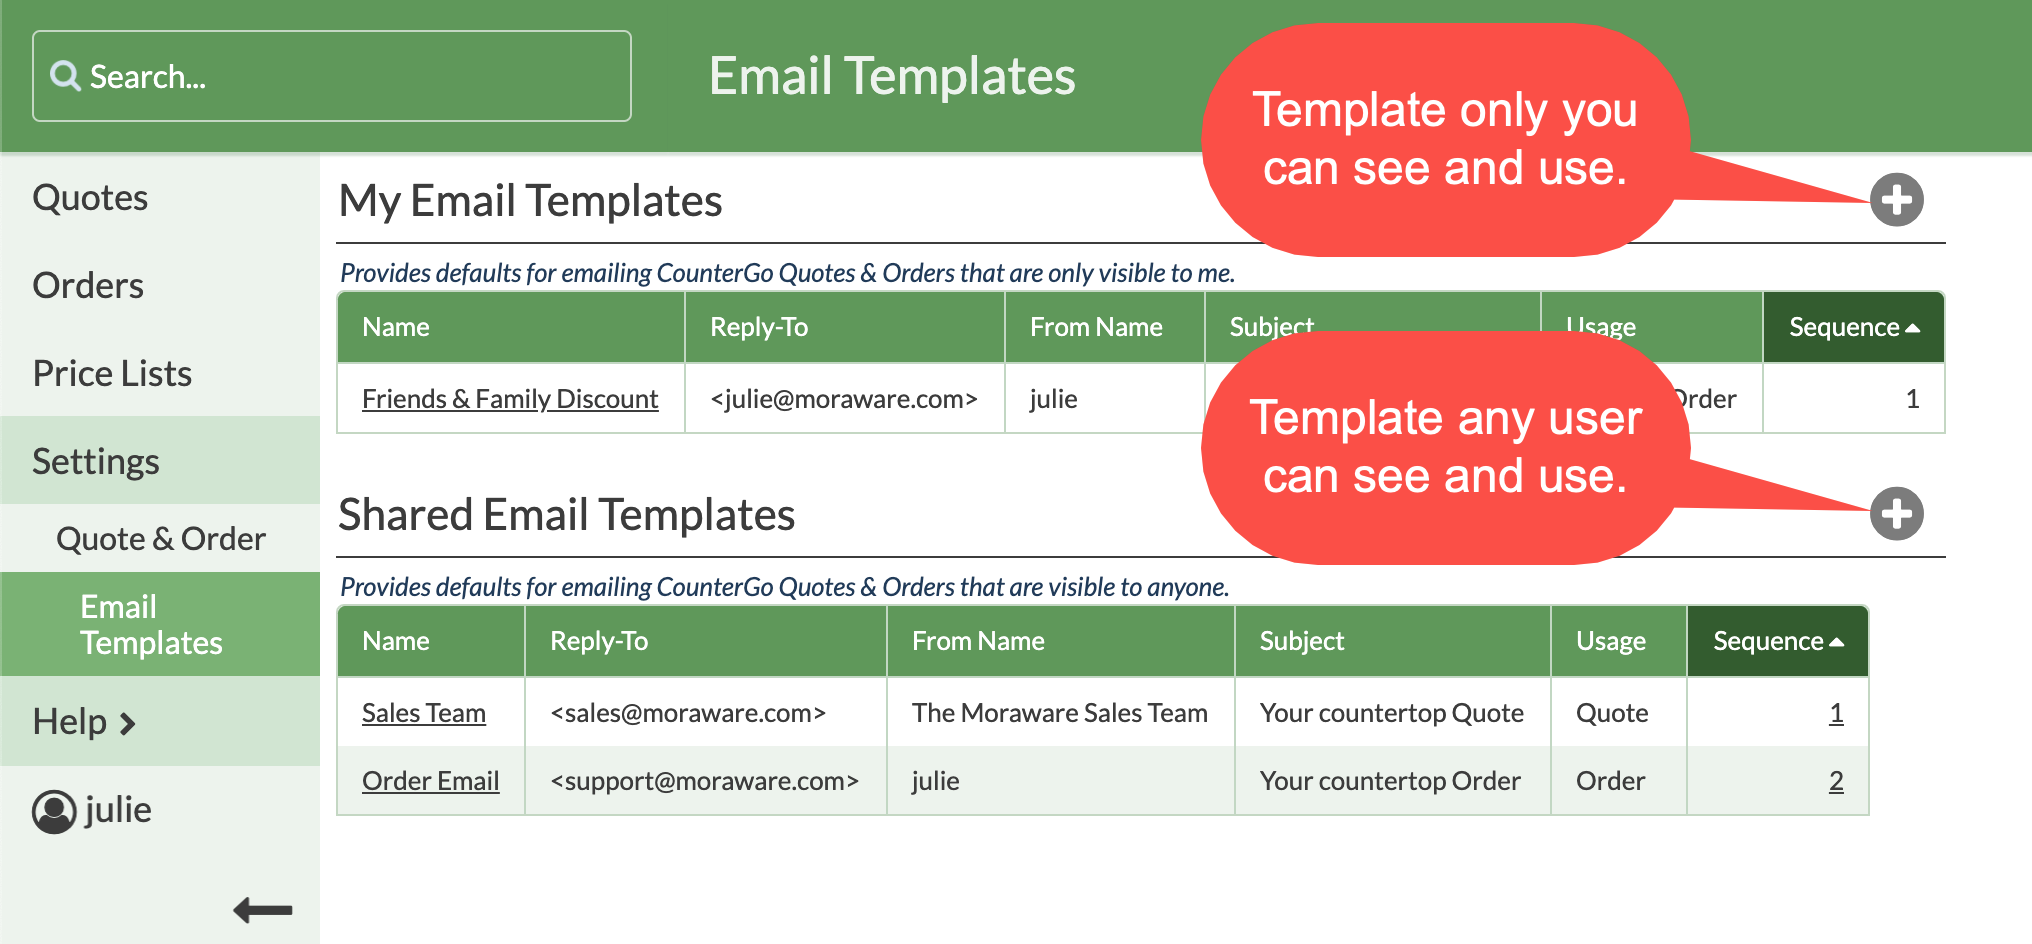 My email templates and shared email templates